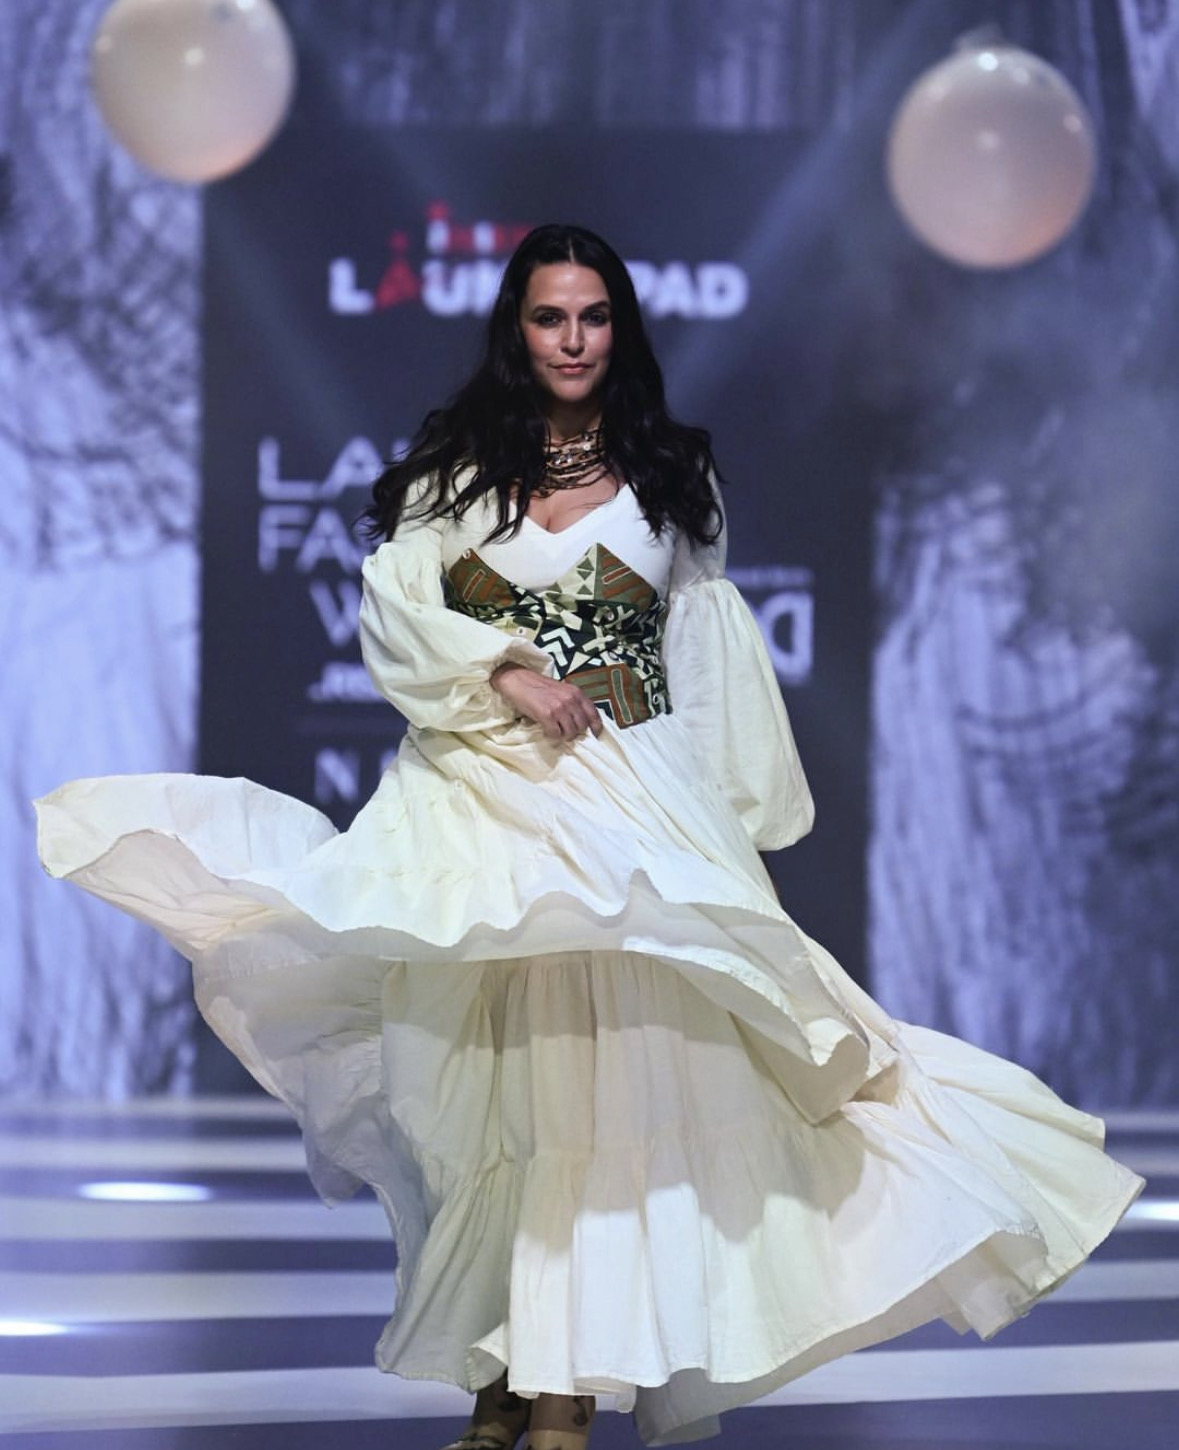 Actress Neha Dhupia turned showstopper for the INIFD launchpad. Photo Courtesy: lakmefashionwk/Instagram